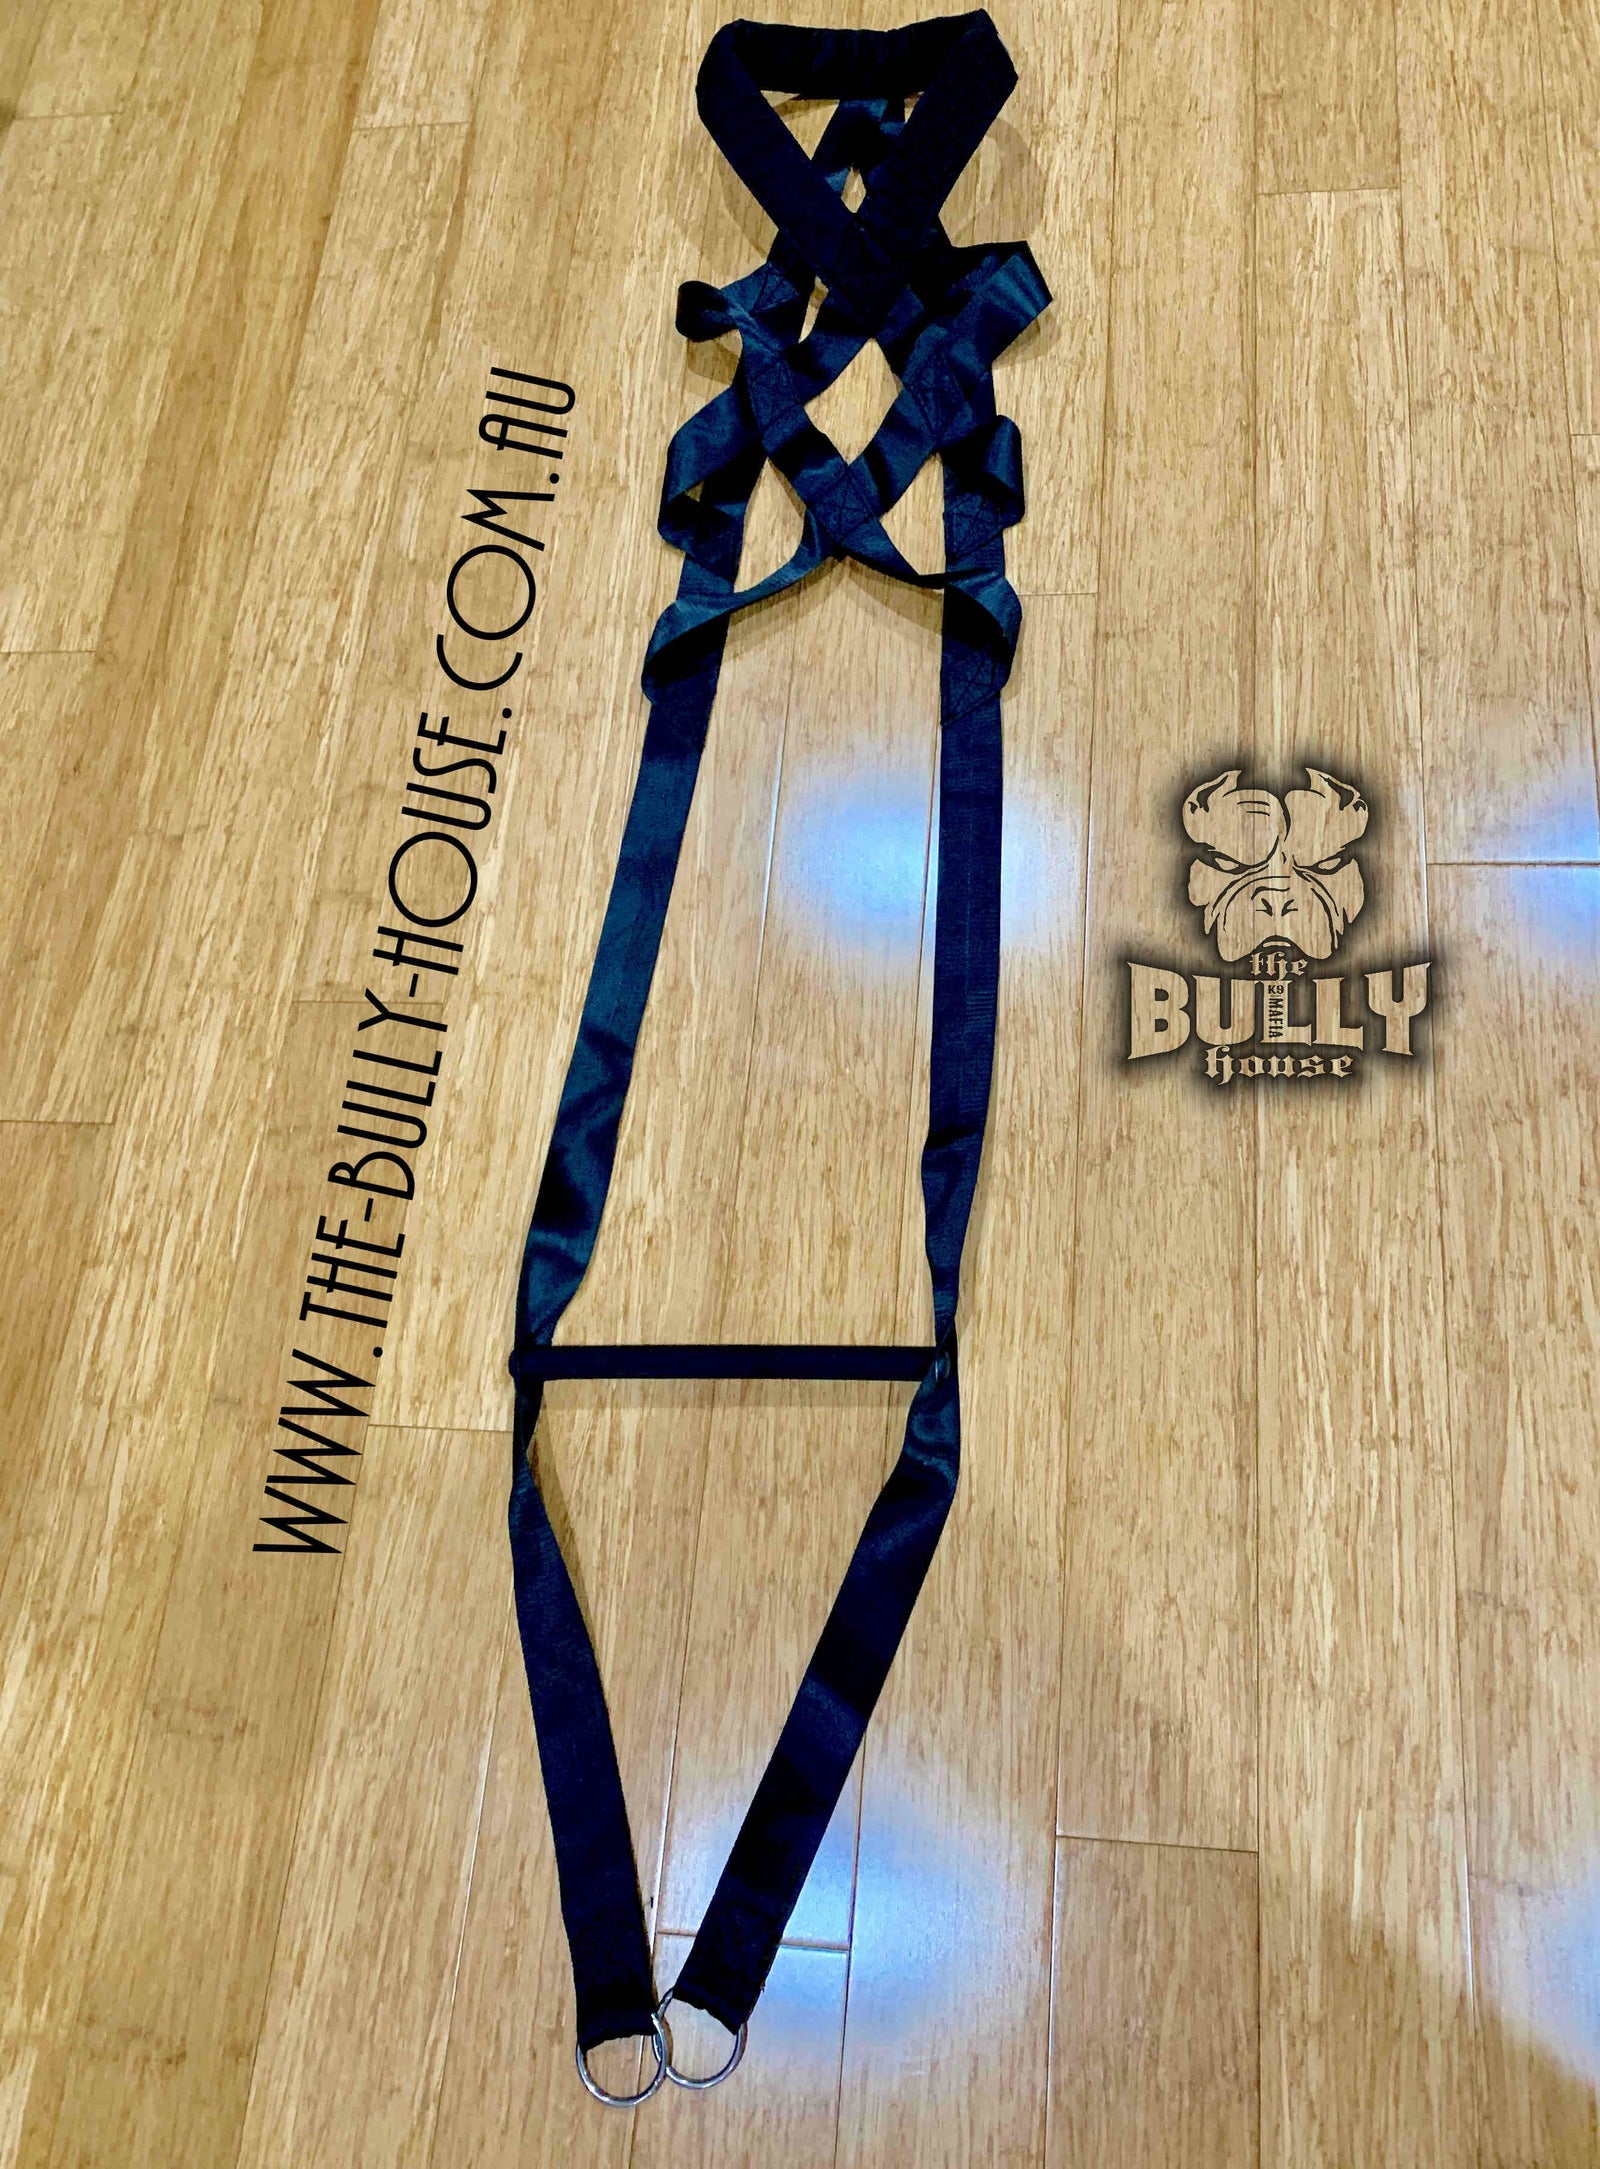 Weight Pull HARNESS (BLACK)